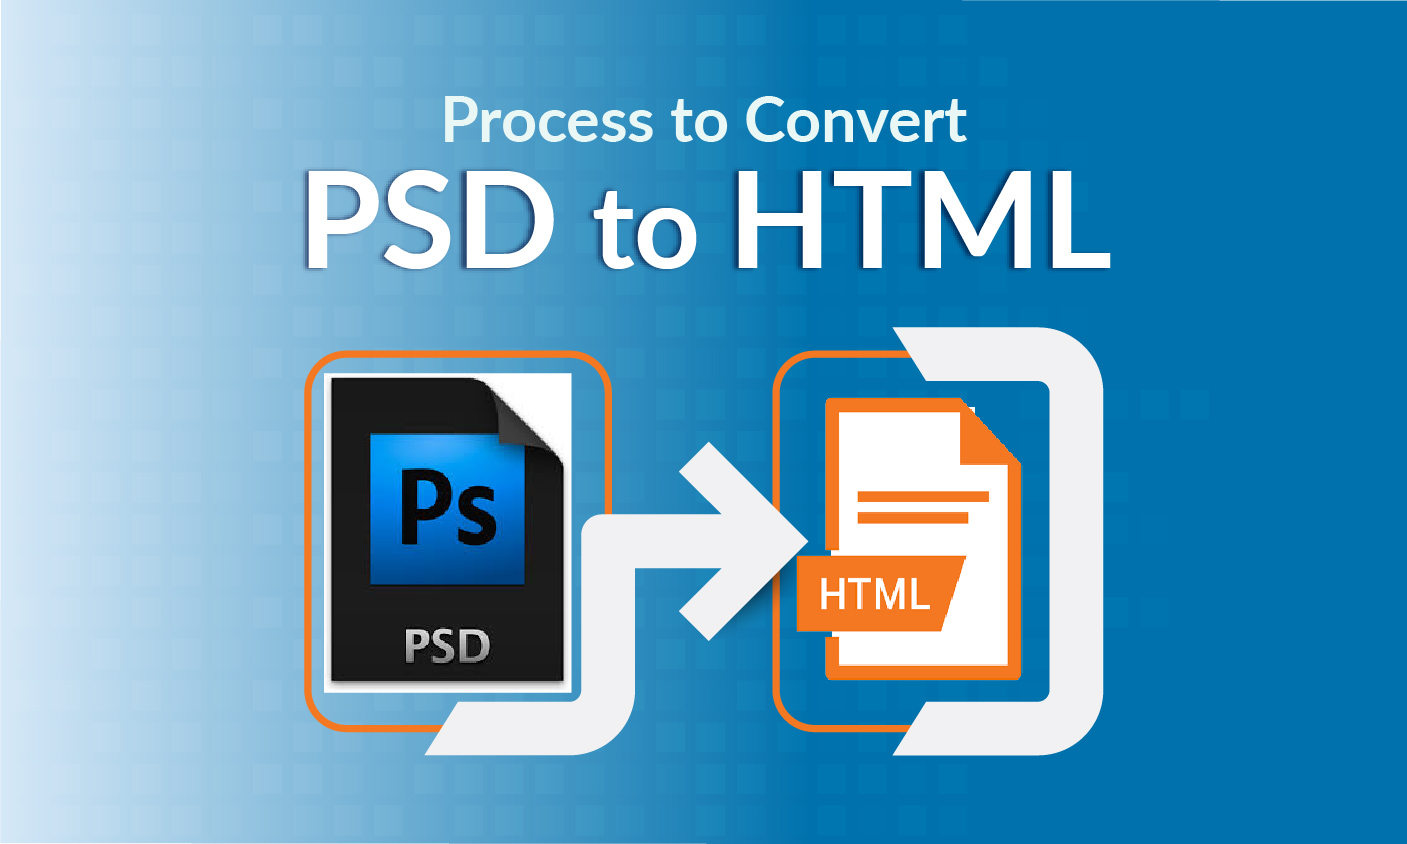 Psd конвертер. Convert PSD. PSD to cdr Converter. Convert from PSD to html. Eps to PSD.